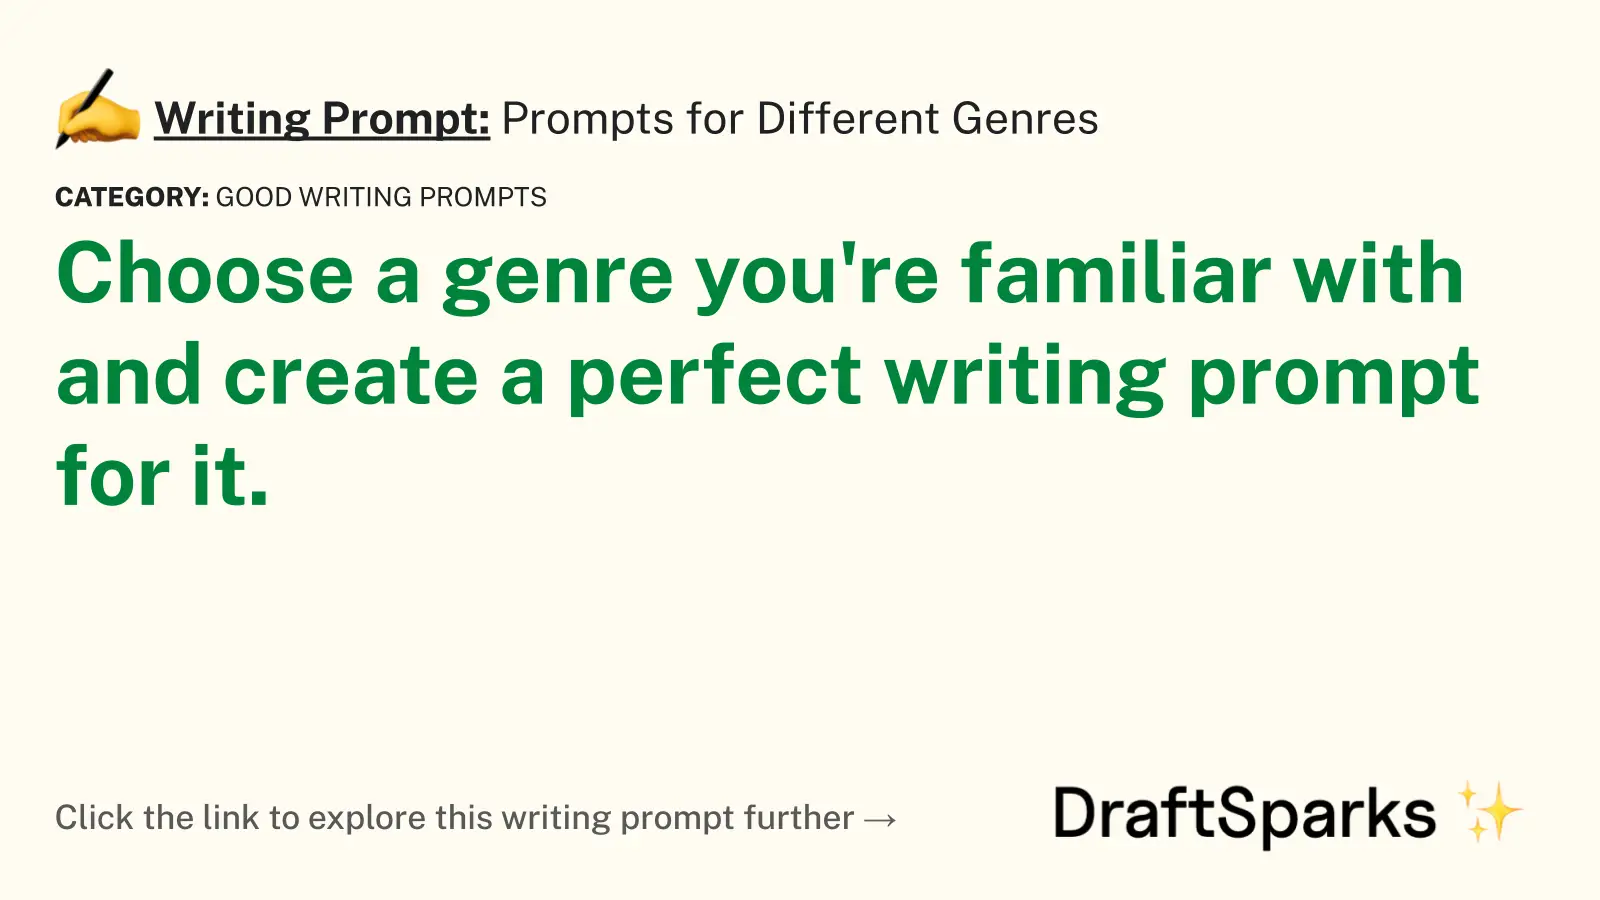 Prompts for Different Genres